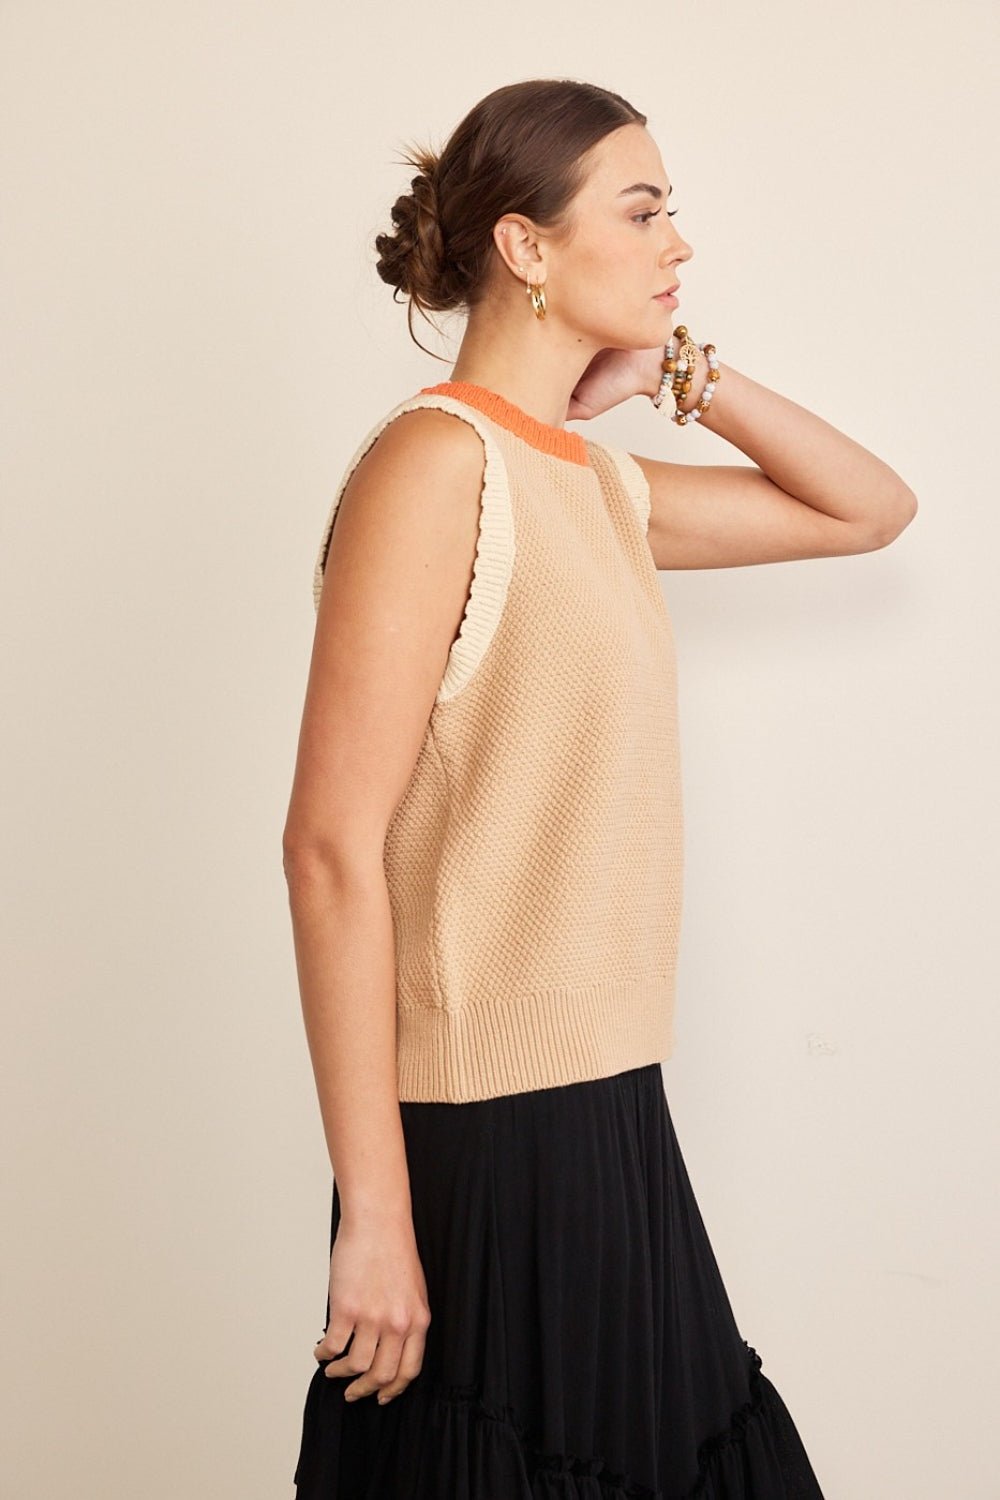 Contrast Crew Neck Sleeveless Sweater in Taupe MultiSweaterIN FEBRUARY